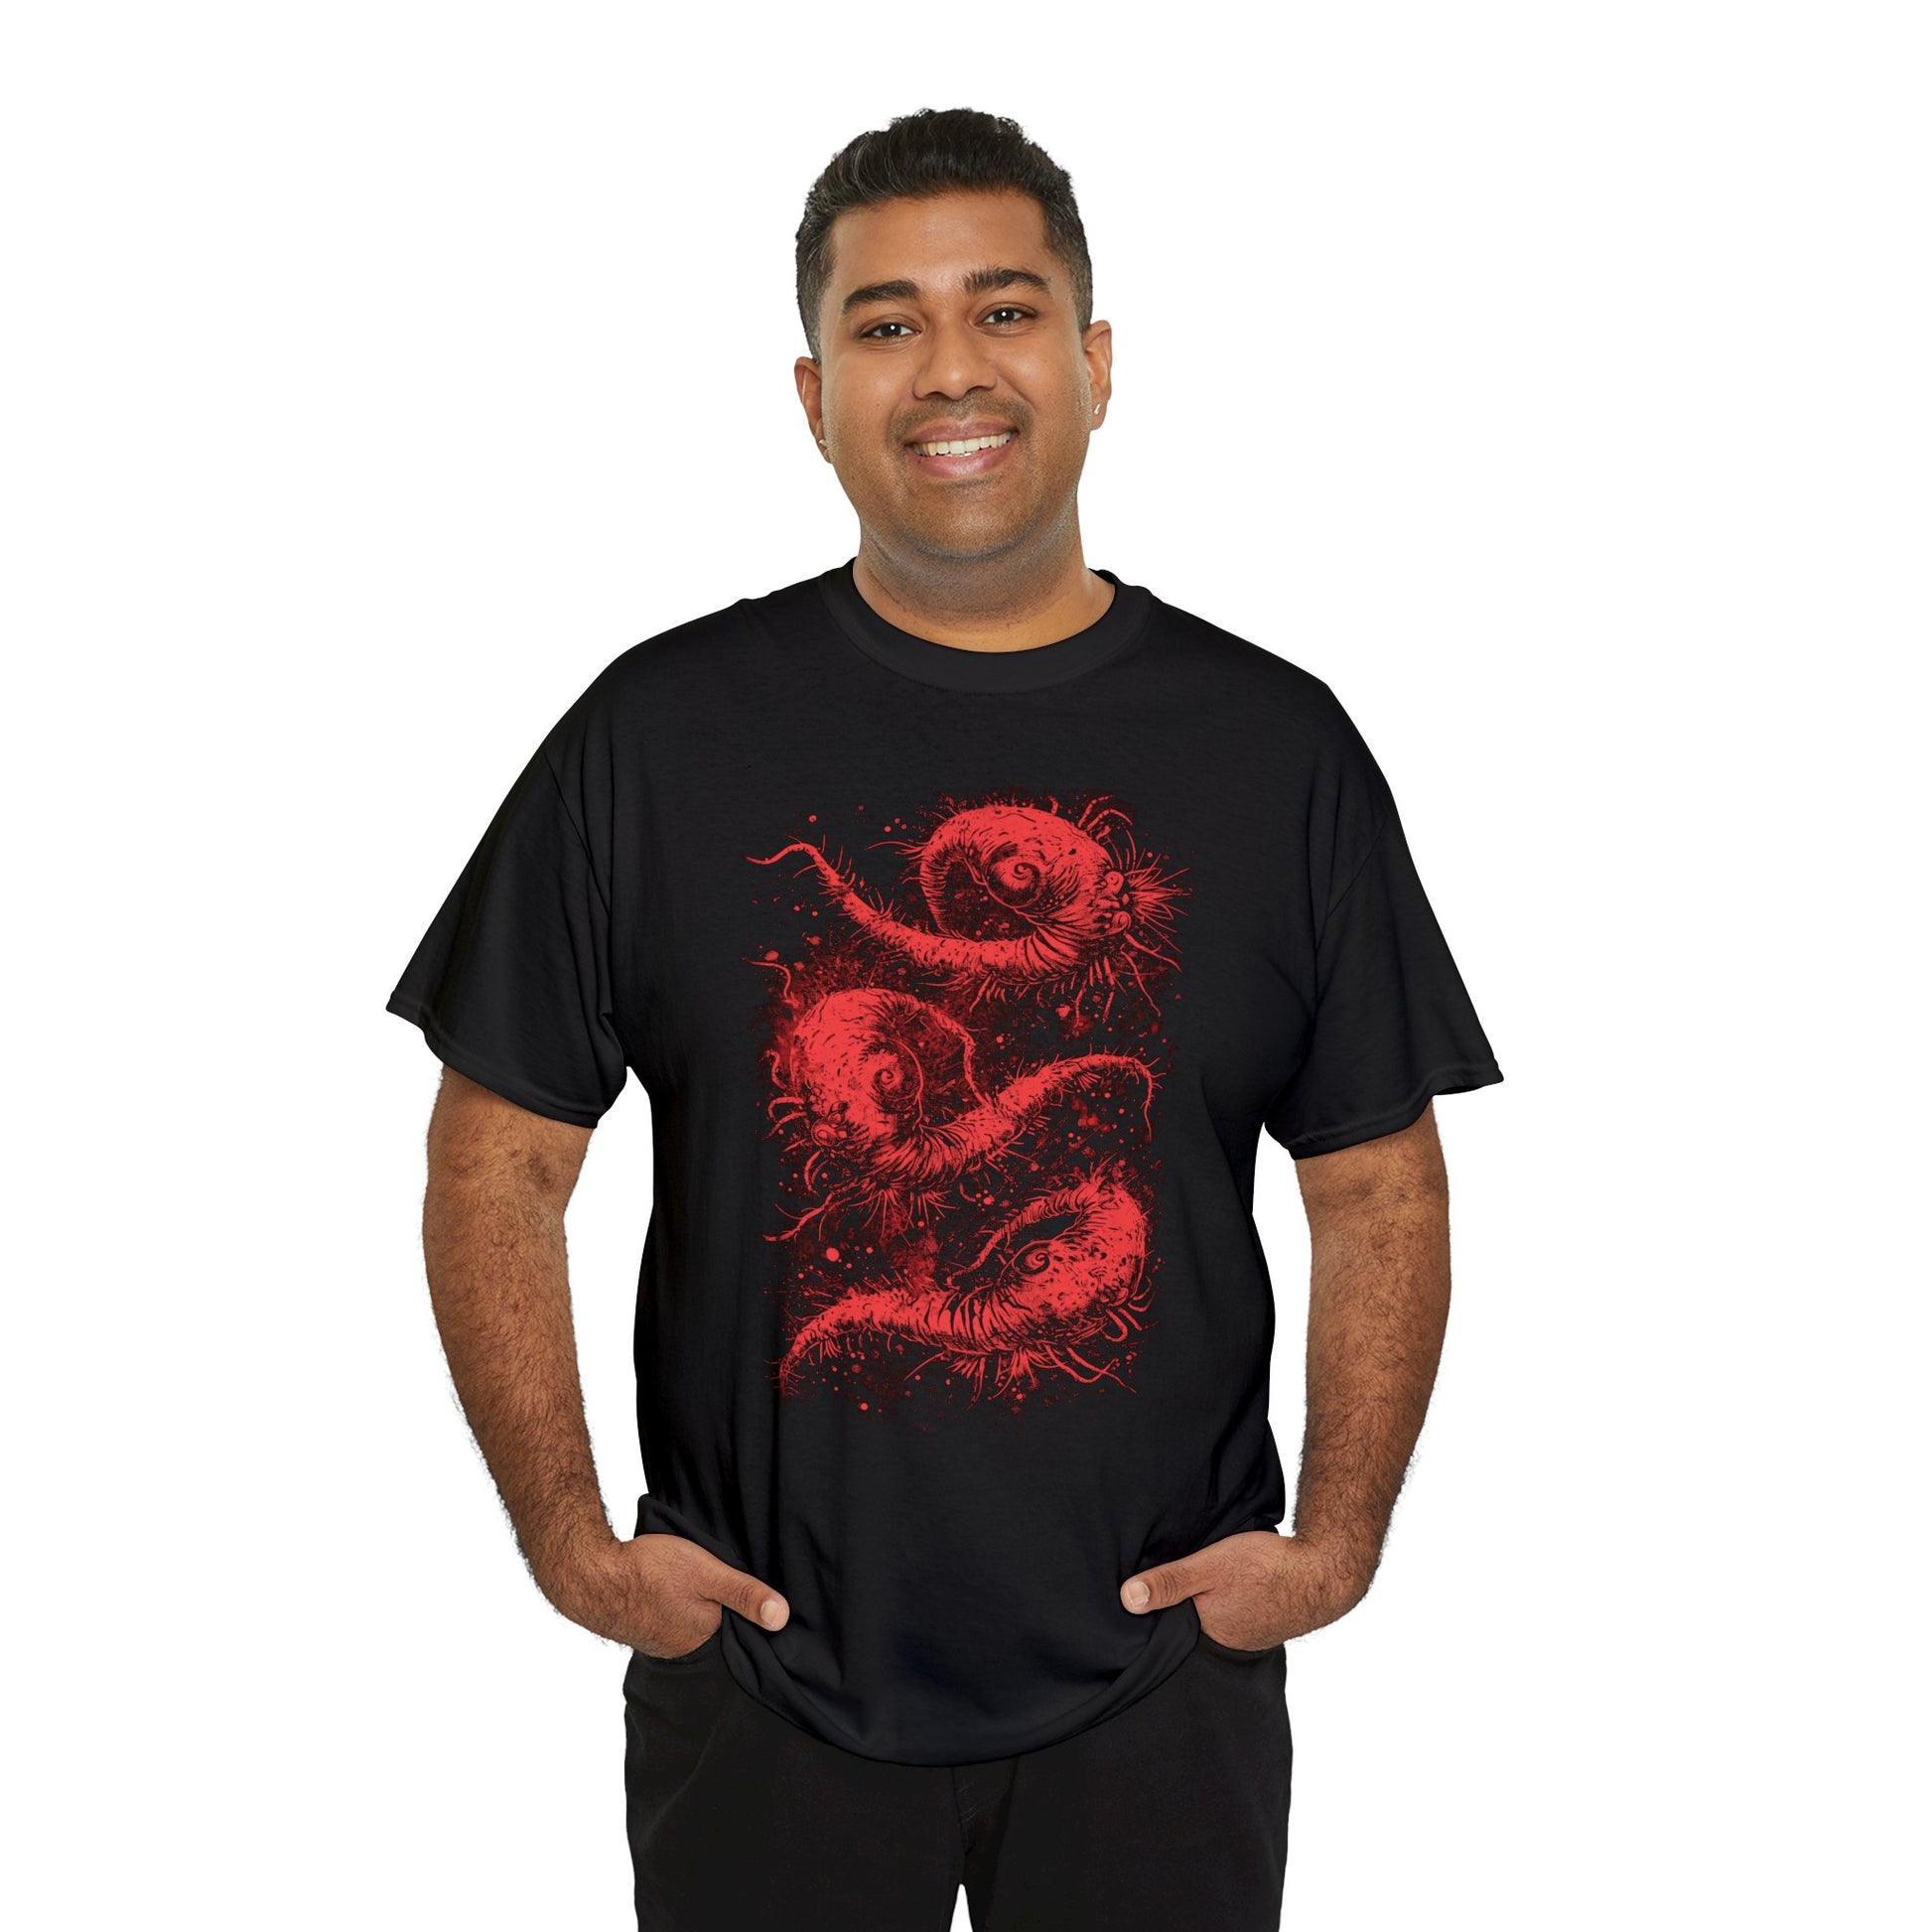 Unisex T-shirt Cosmic Worms in Red - Frogos Design